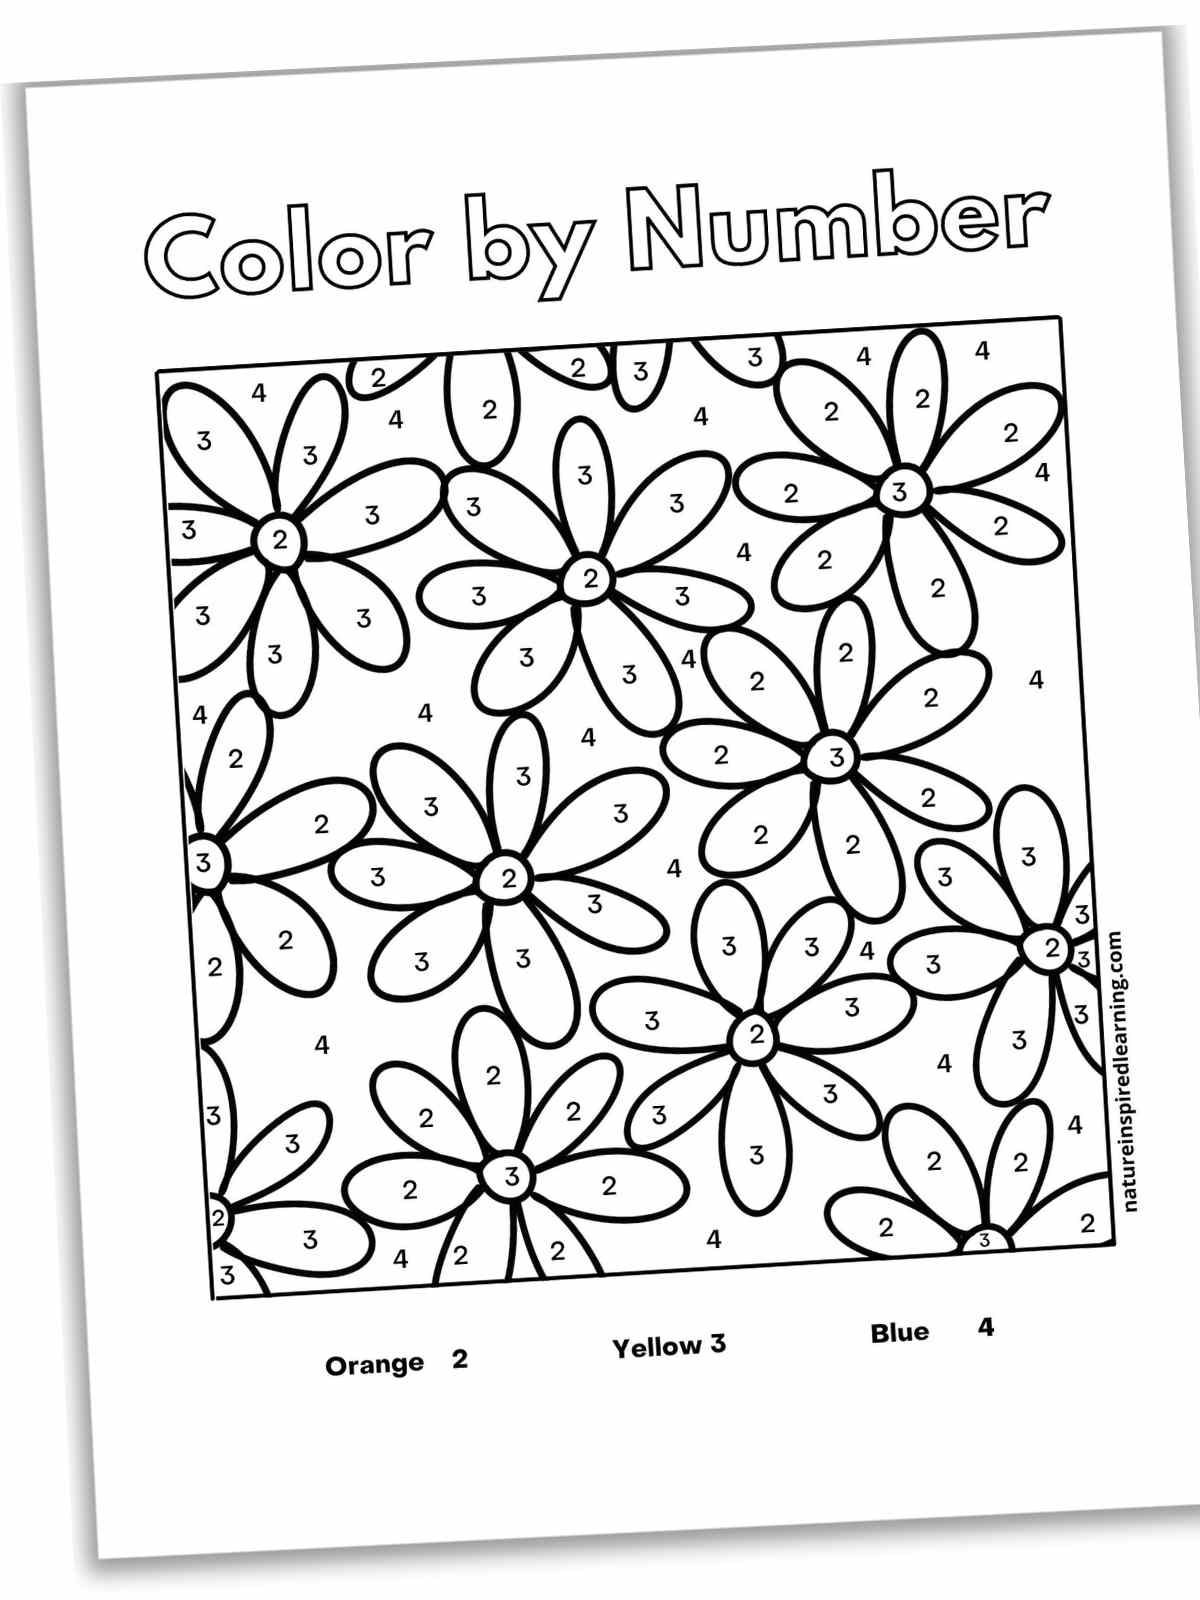 Flowers Color By Number Book For kids: Easy Flower illustration color by  number for kids ages 8-12 (Paperback)